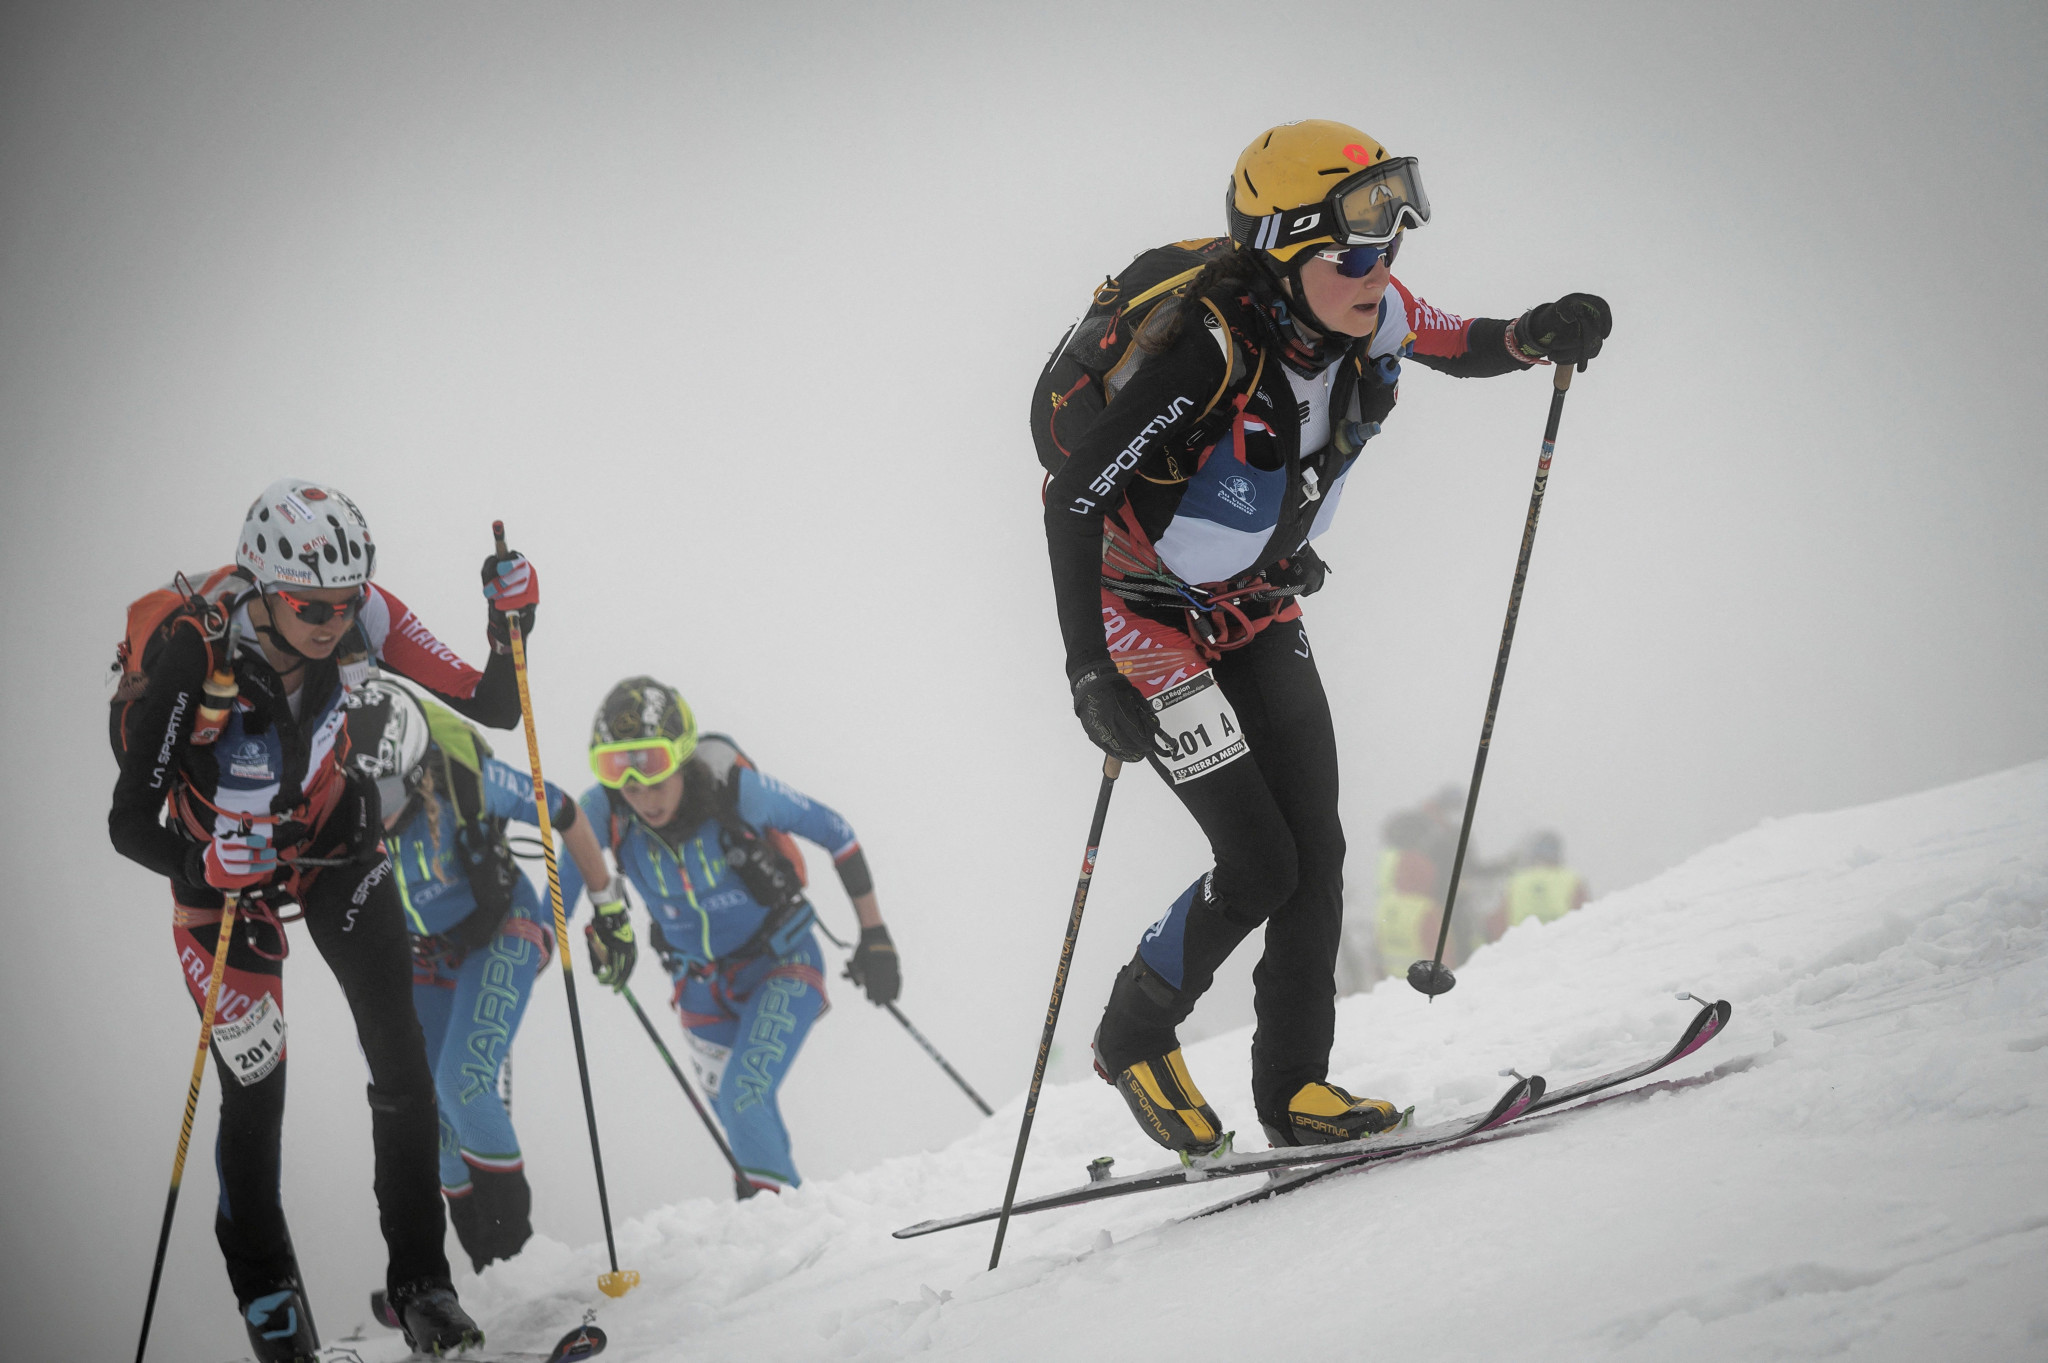 France and Italy tipped to dominate Ski Mountaineering World Championships in Pyrenees